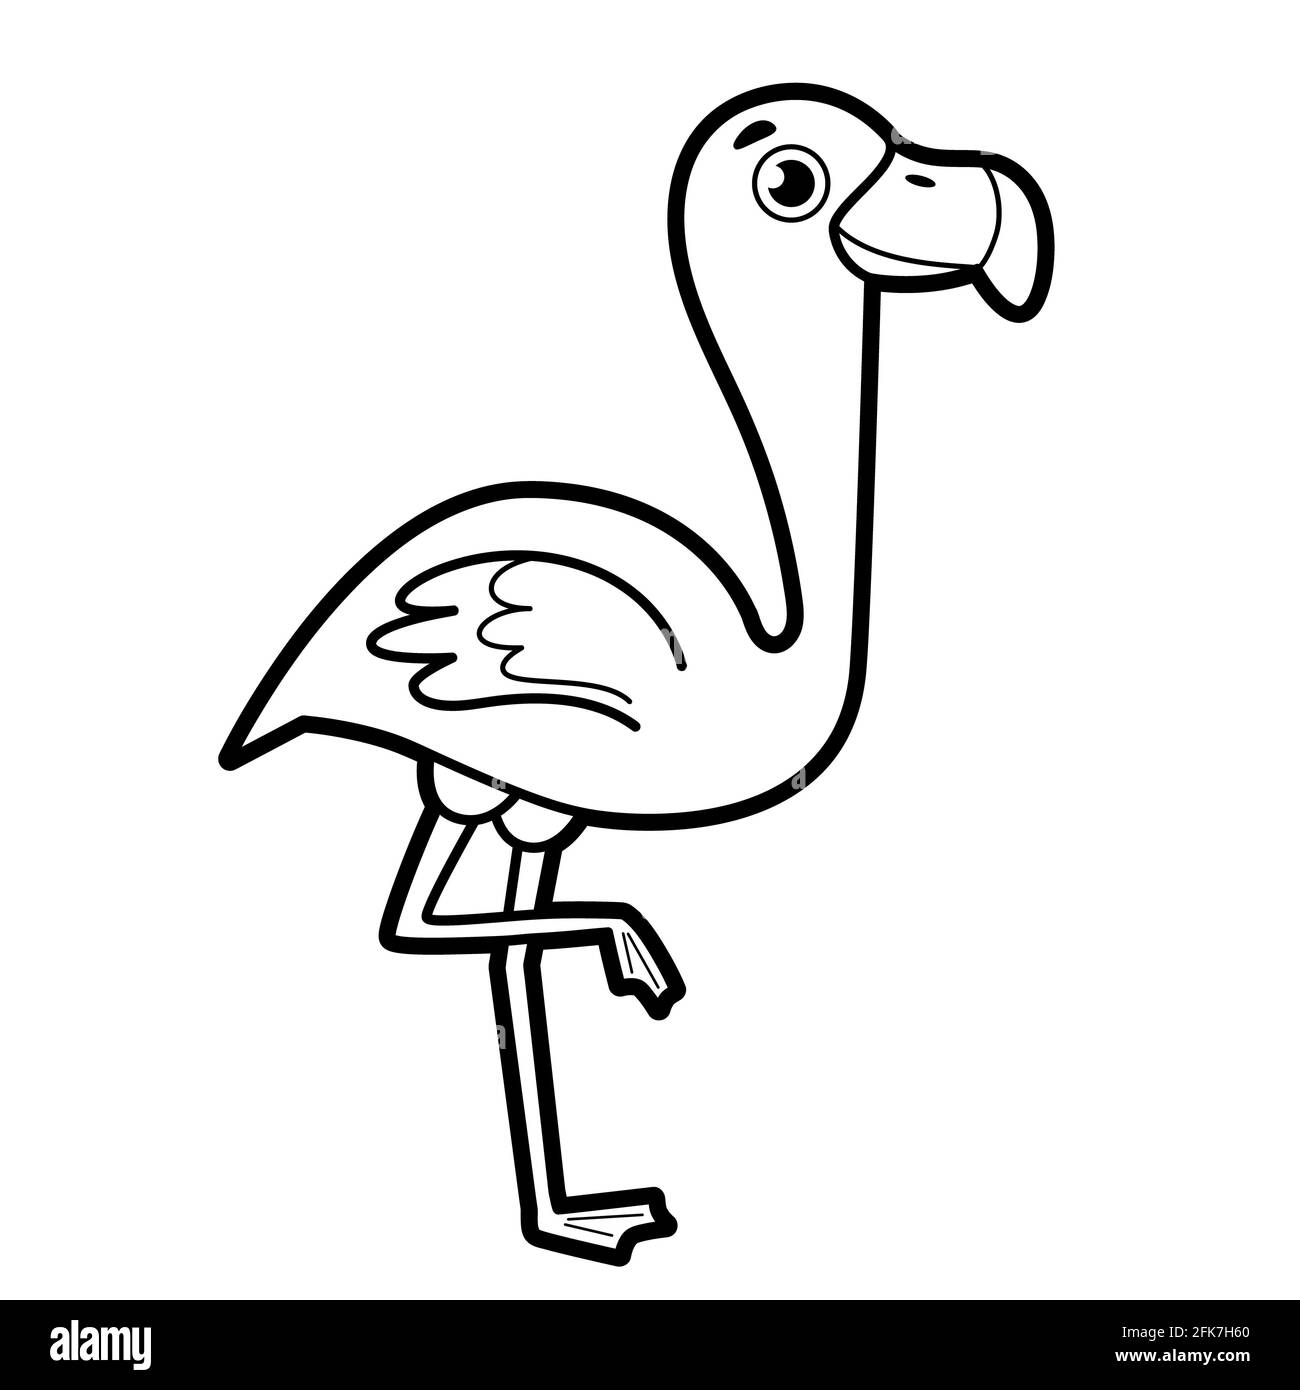 Coloring book or page for kids. flamingo black and white illustration Stock  Photo - Alamy